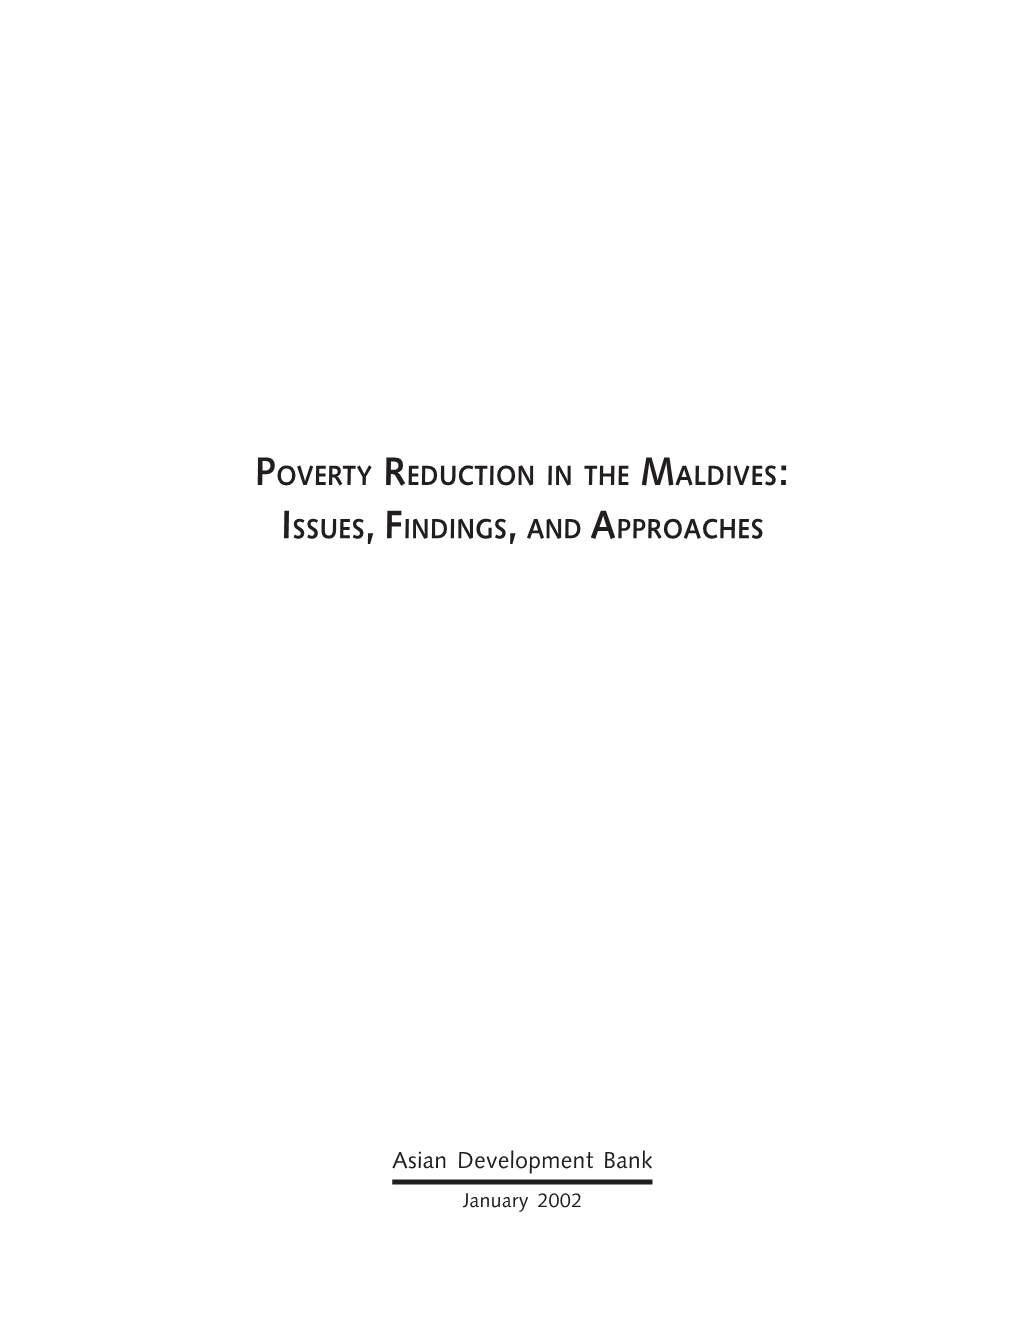 Poverty Reduction in the Maldives: Issues, Findings, and Approaches